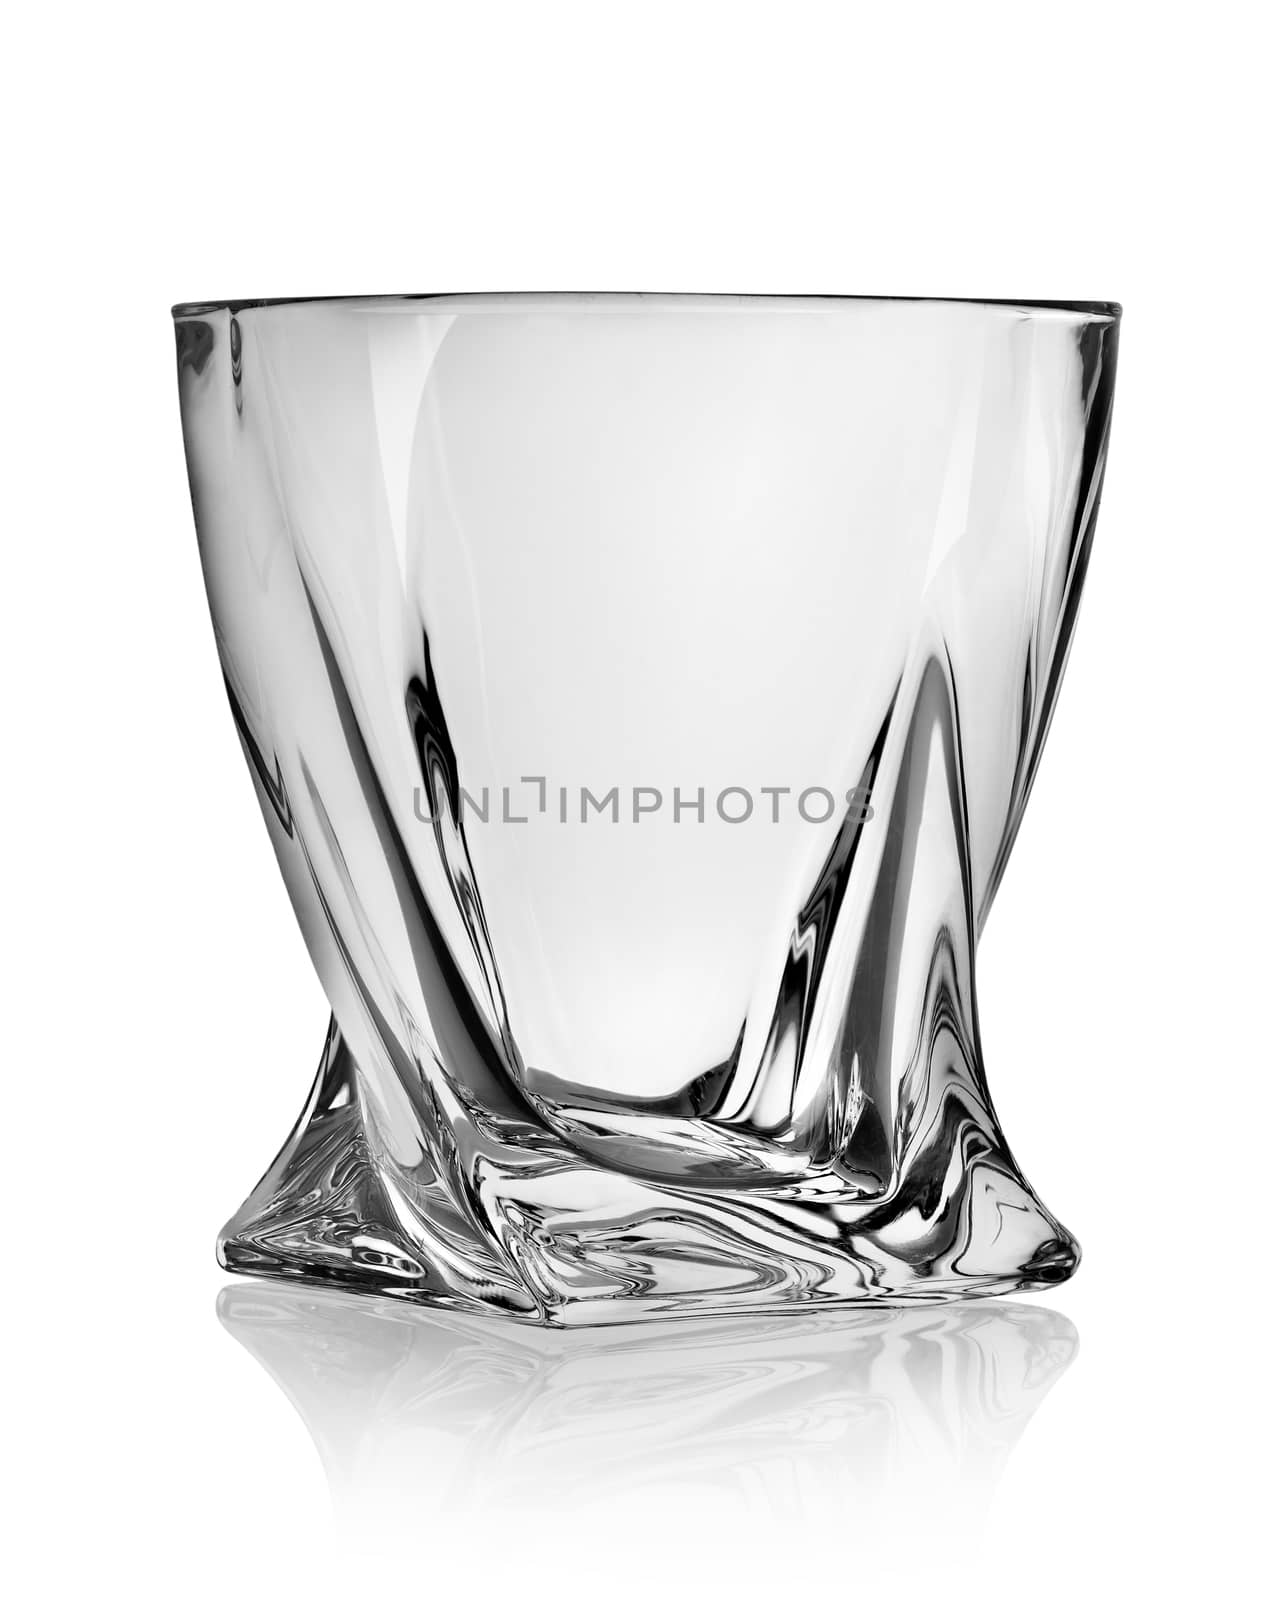 Figured glass for whiskey by Givaga